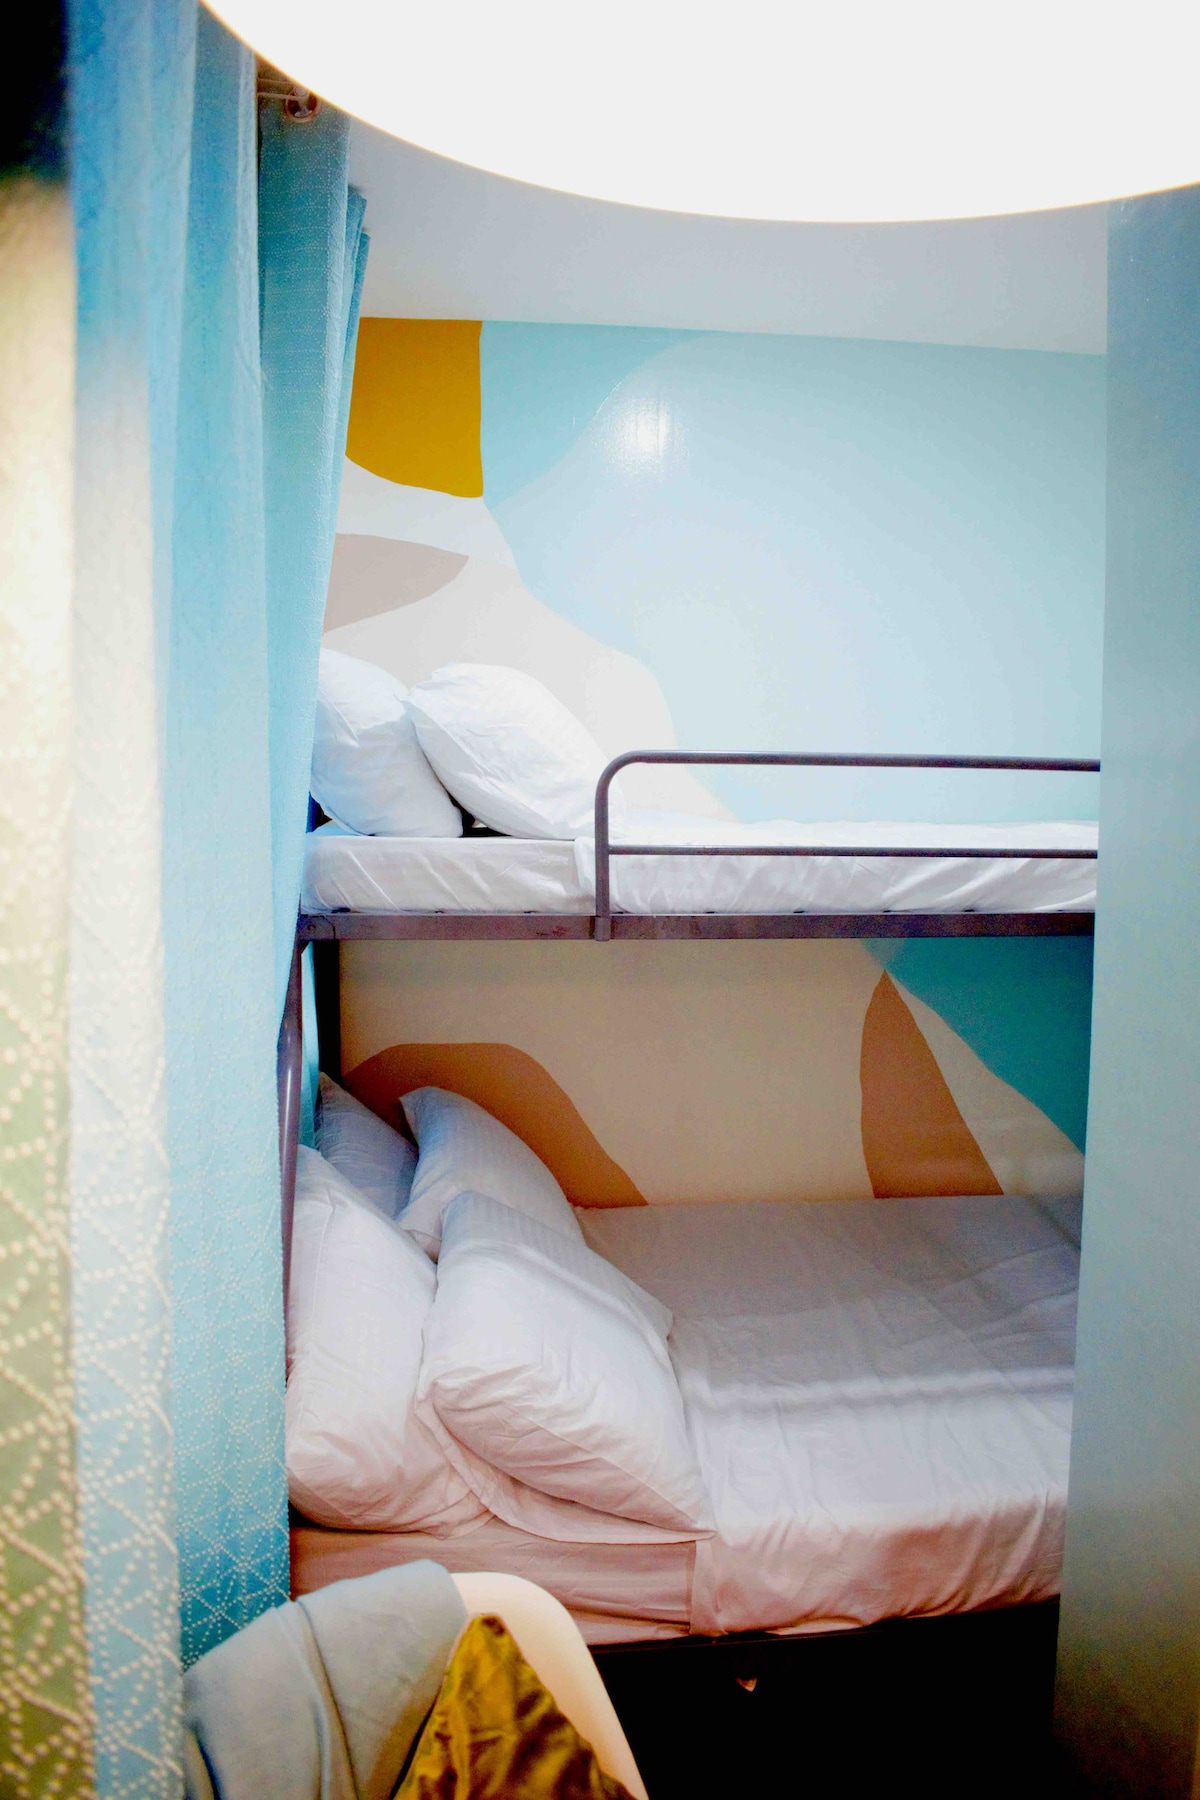 Private Rm at the heart of Cebu City w/ A/C & Wifi